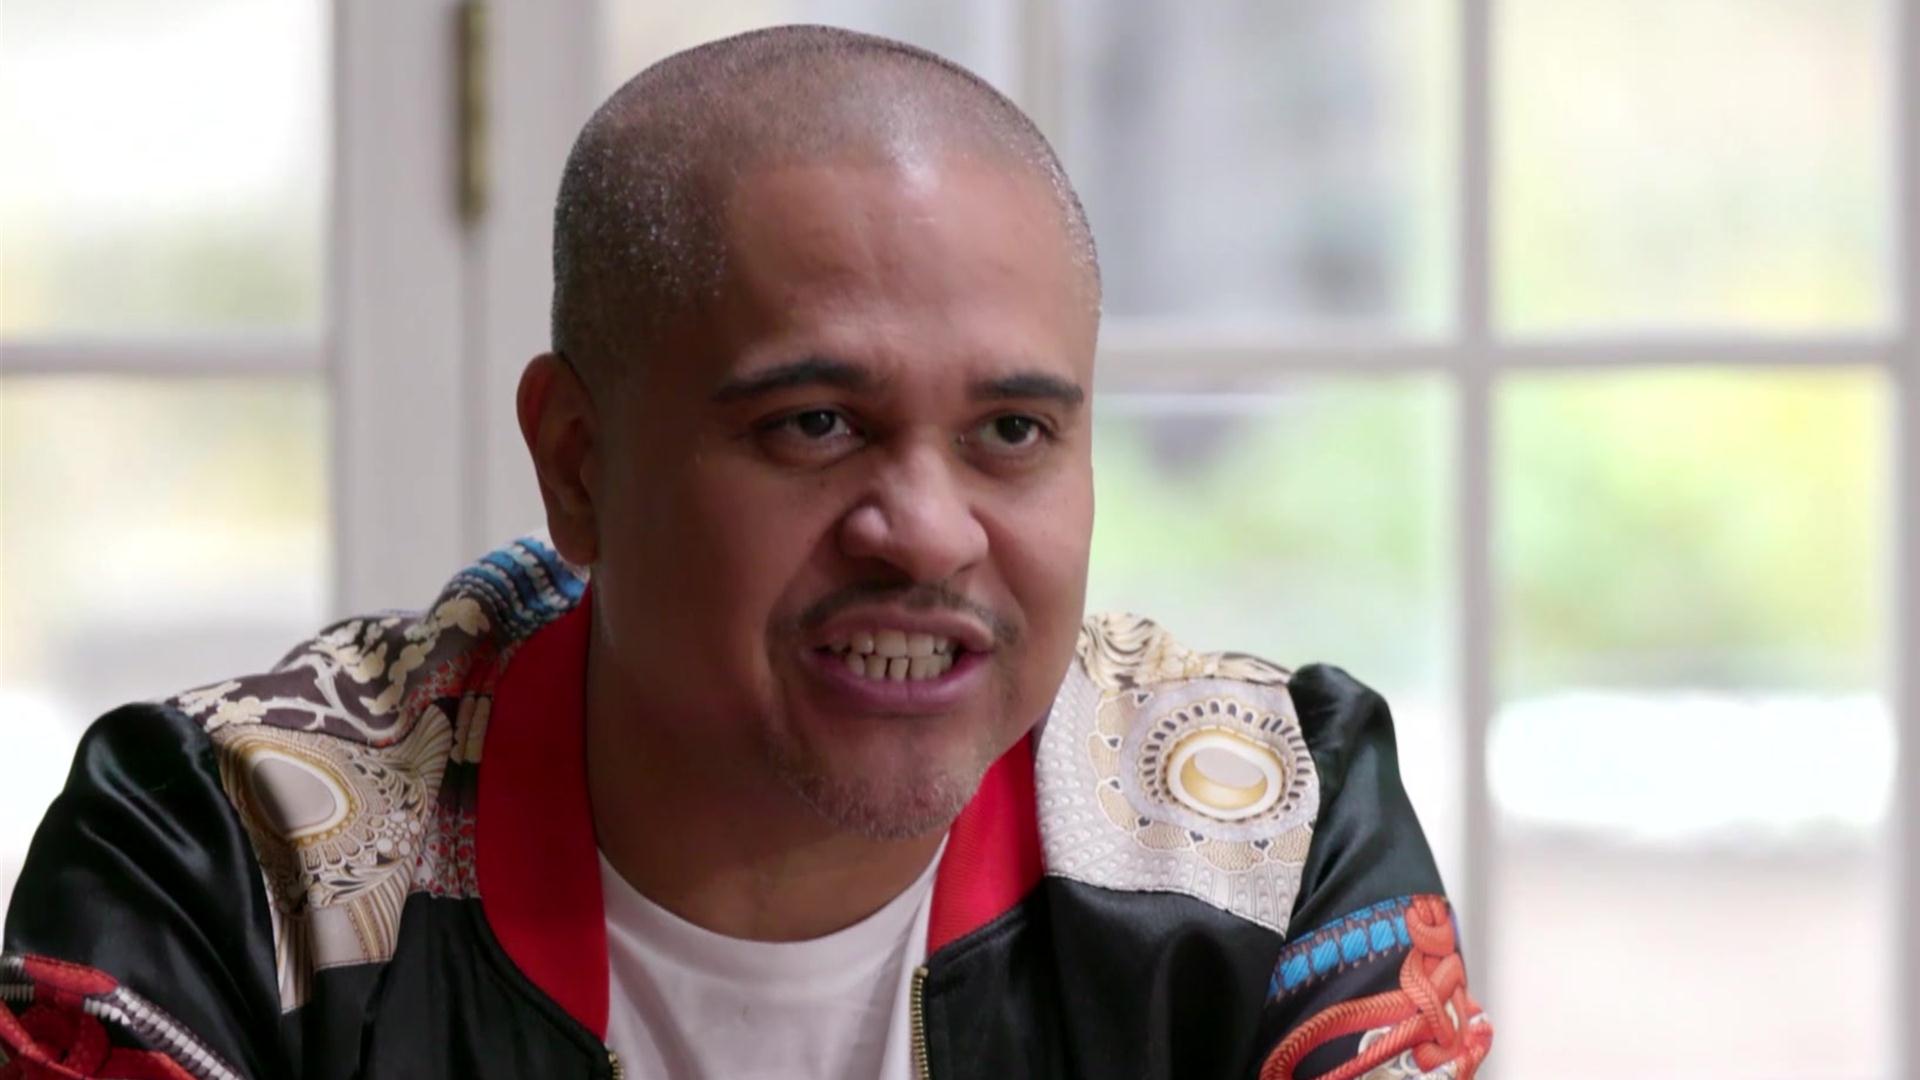 Watch Irv and Charli Make Amends! | Growing Up Hip Hop: New York Video Extras